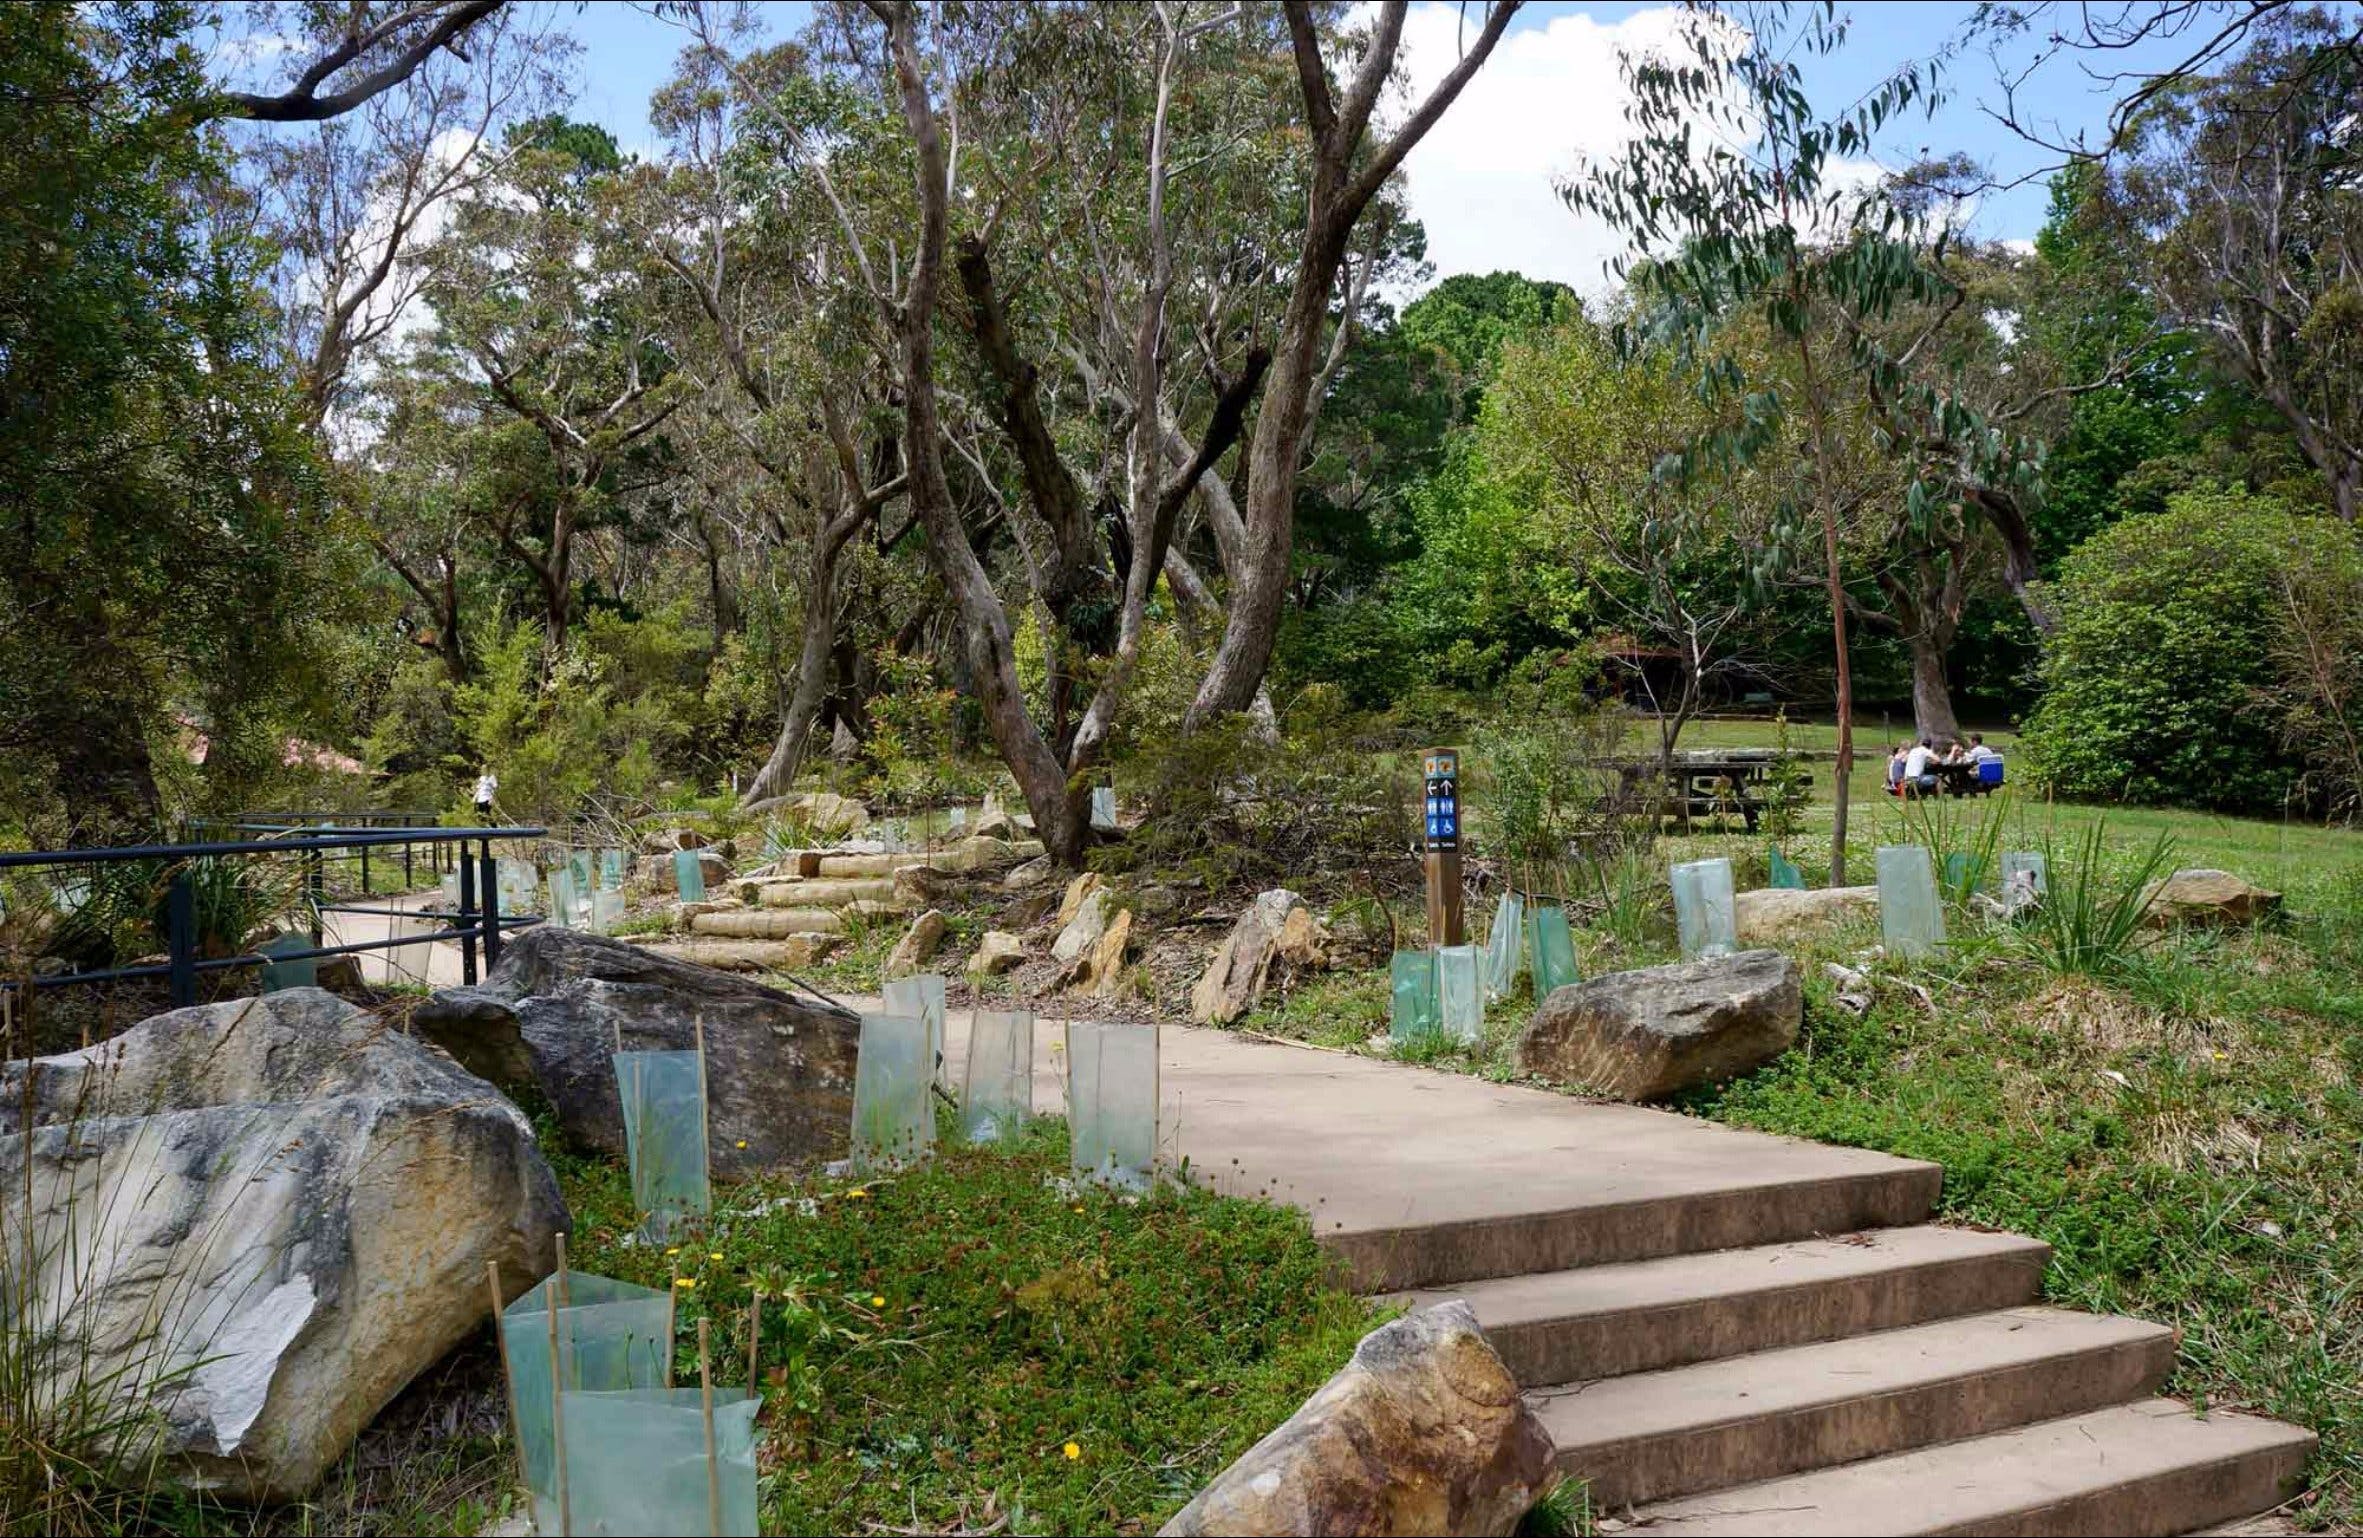 Wentworth Falls picnic area - Accommodation in Surfers Paradise